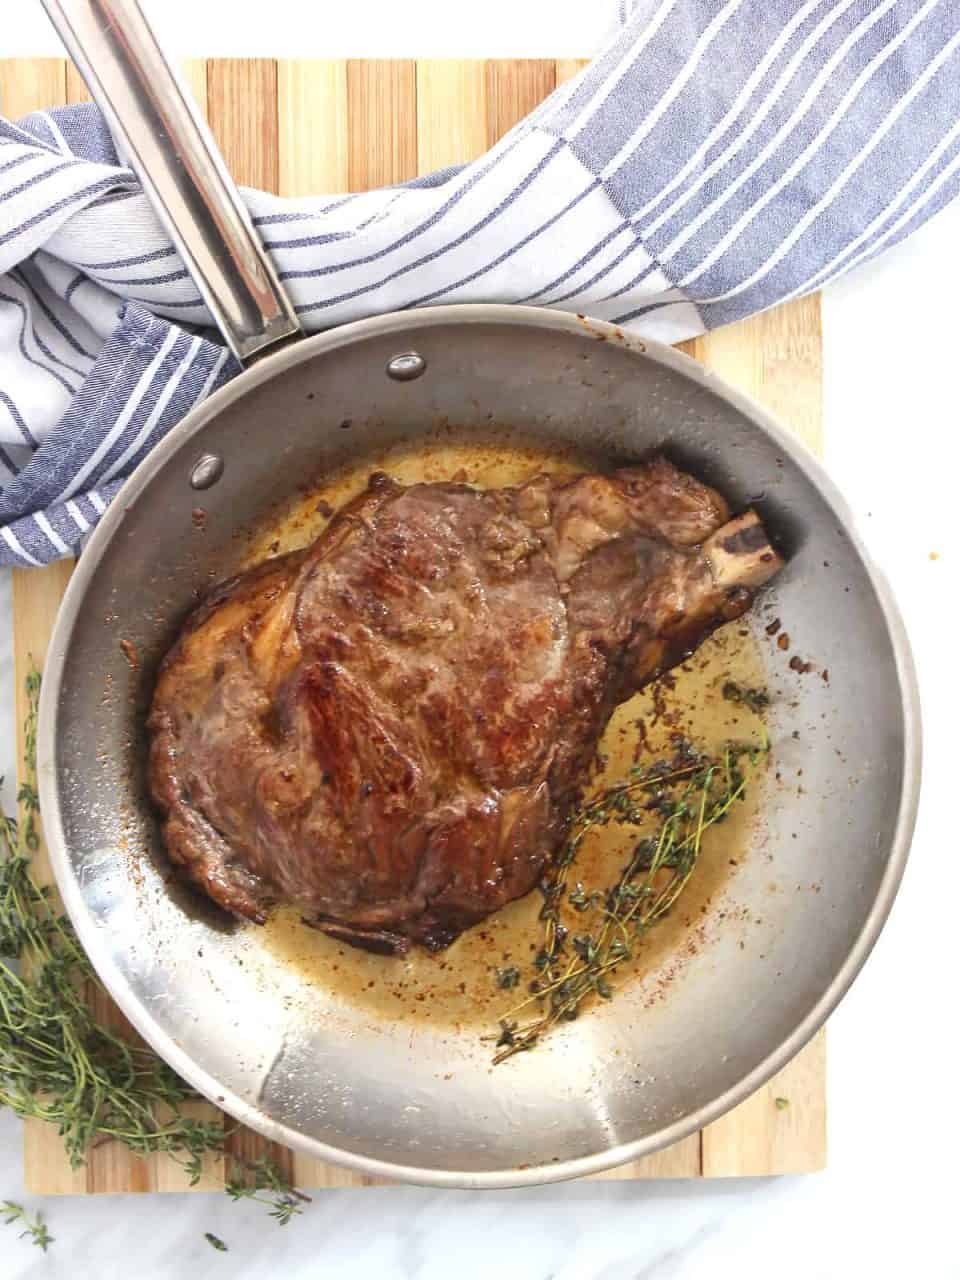 The steak being fried in a pan with fresh thyme